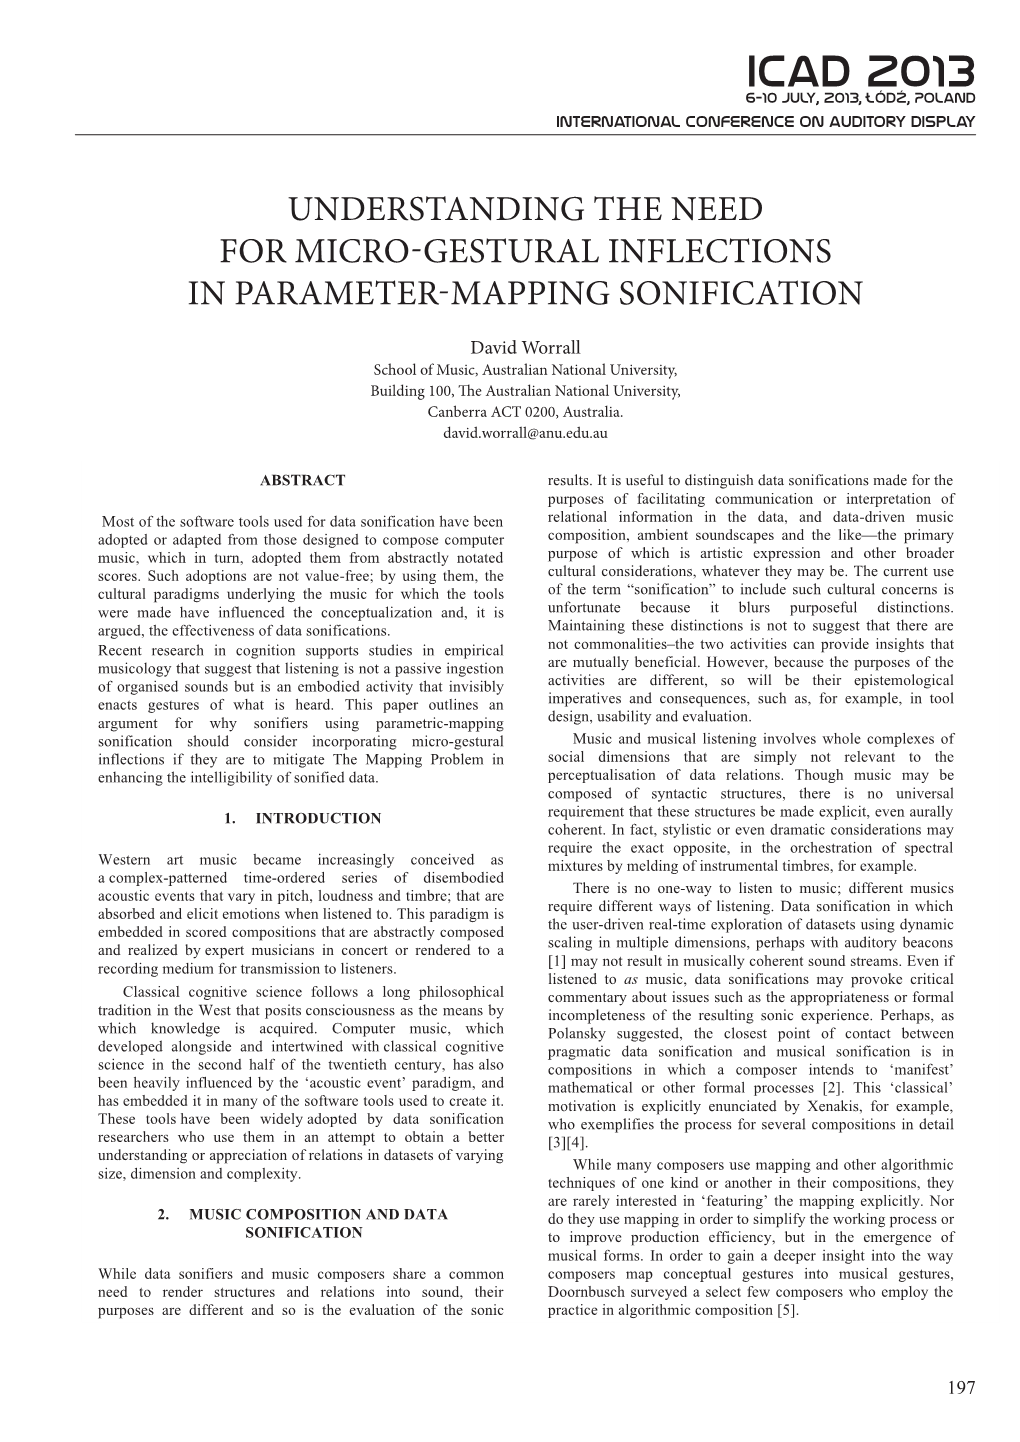 Understanding the Need for Micro-Gestural